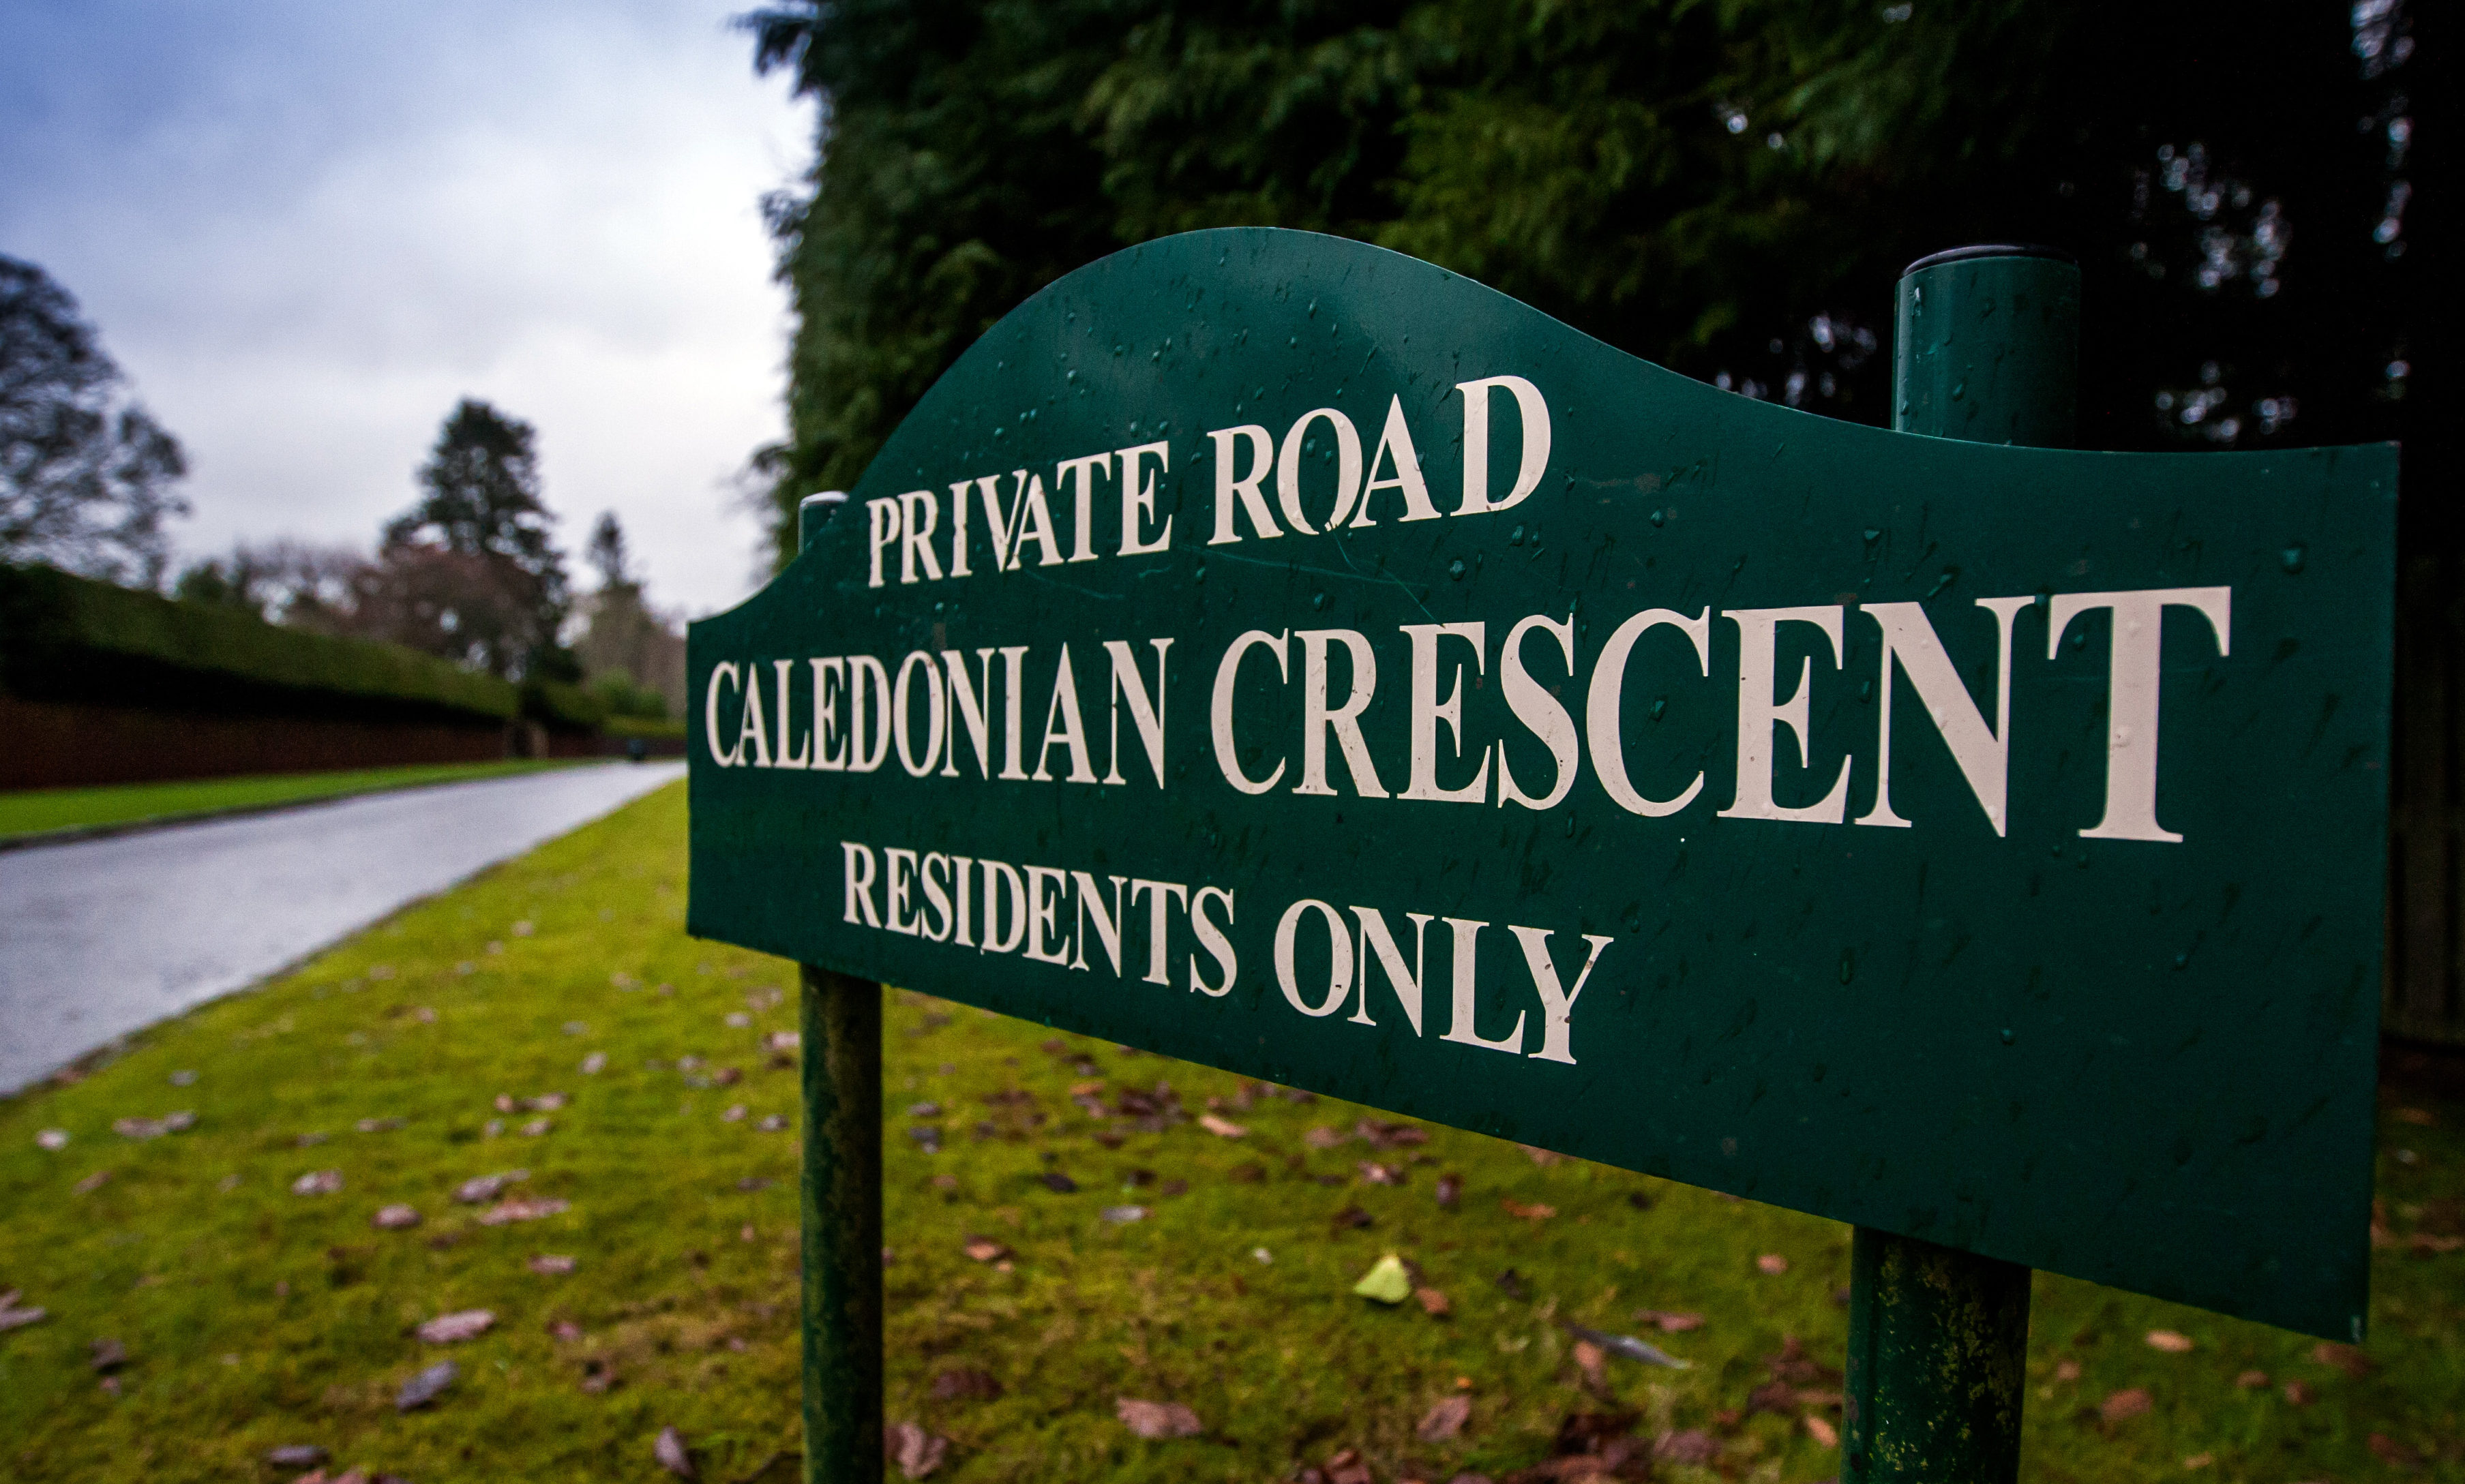 Caledonian Crescent in Perth has been dubbed Millionaire's Row